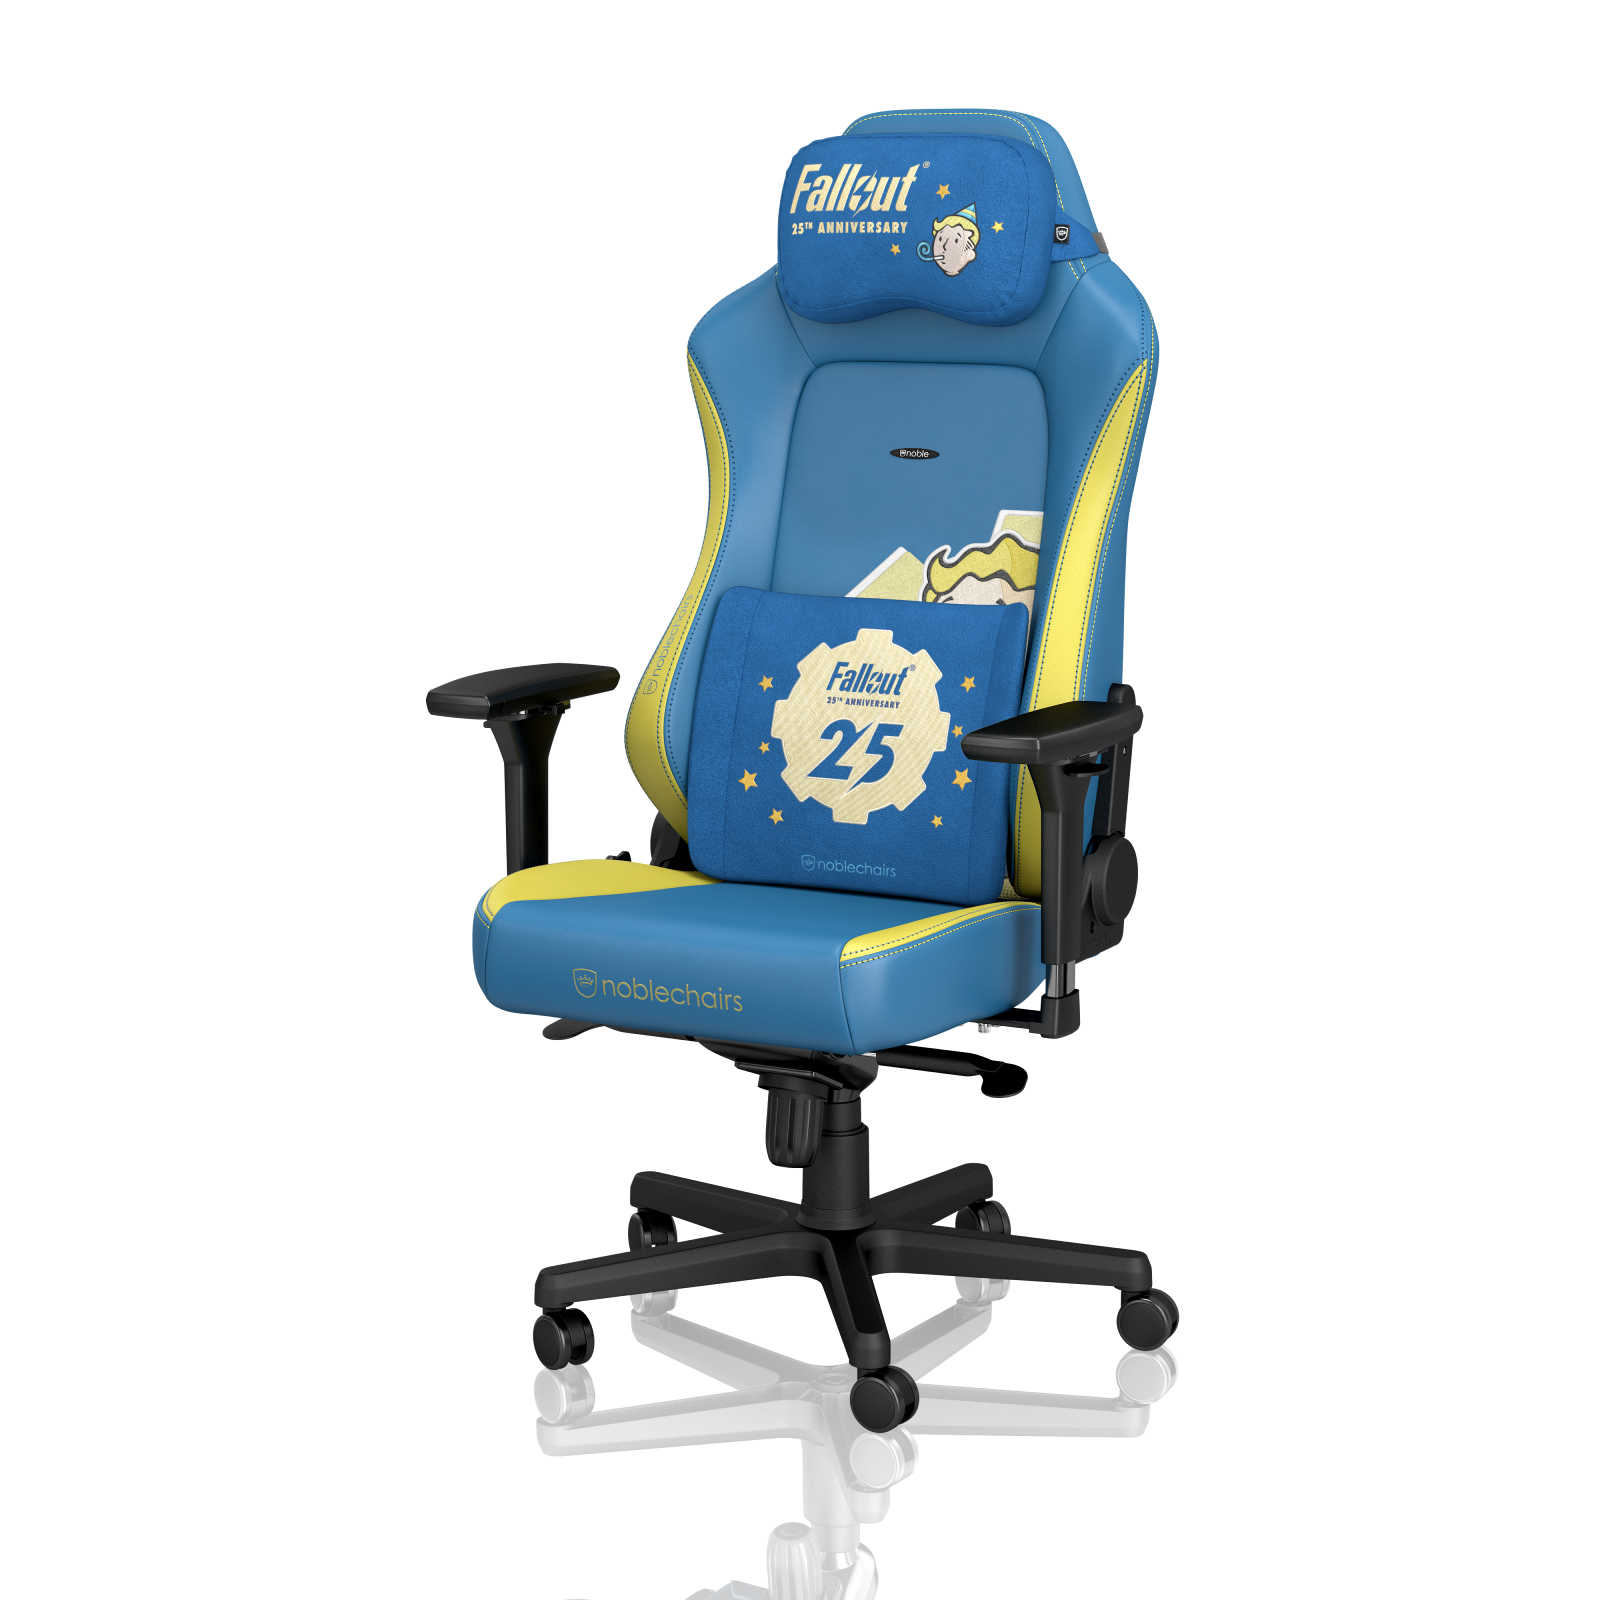 noblechairs HERO Fallout Vault-Tec Edition and Pillow Set Fallout 25th Anniversary Edition